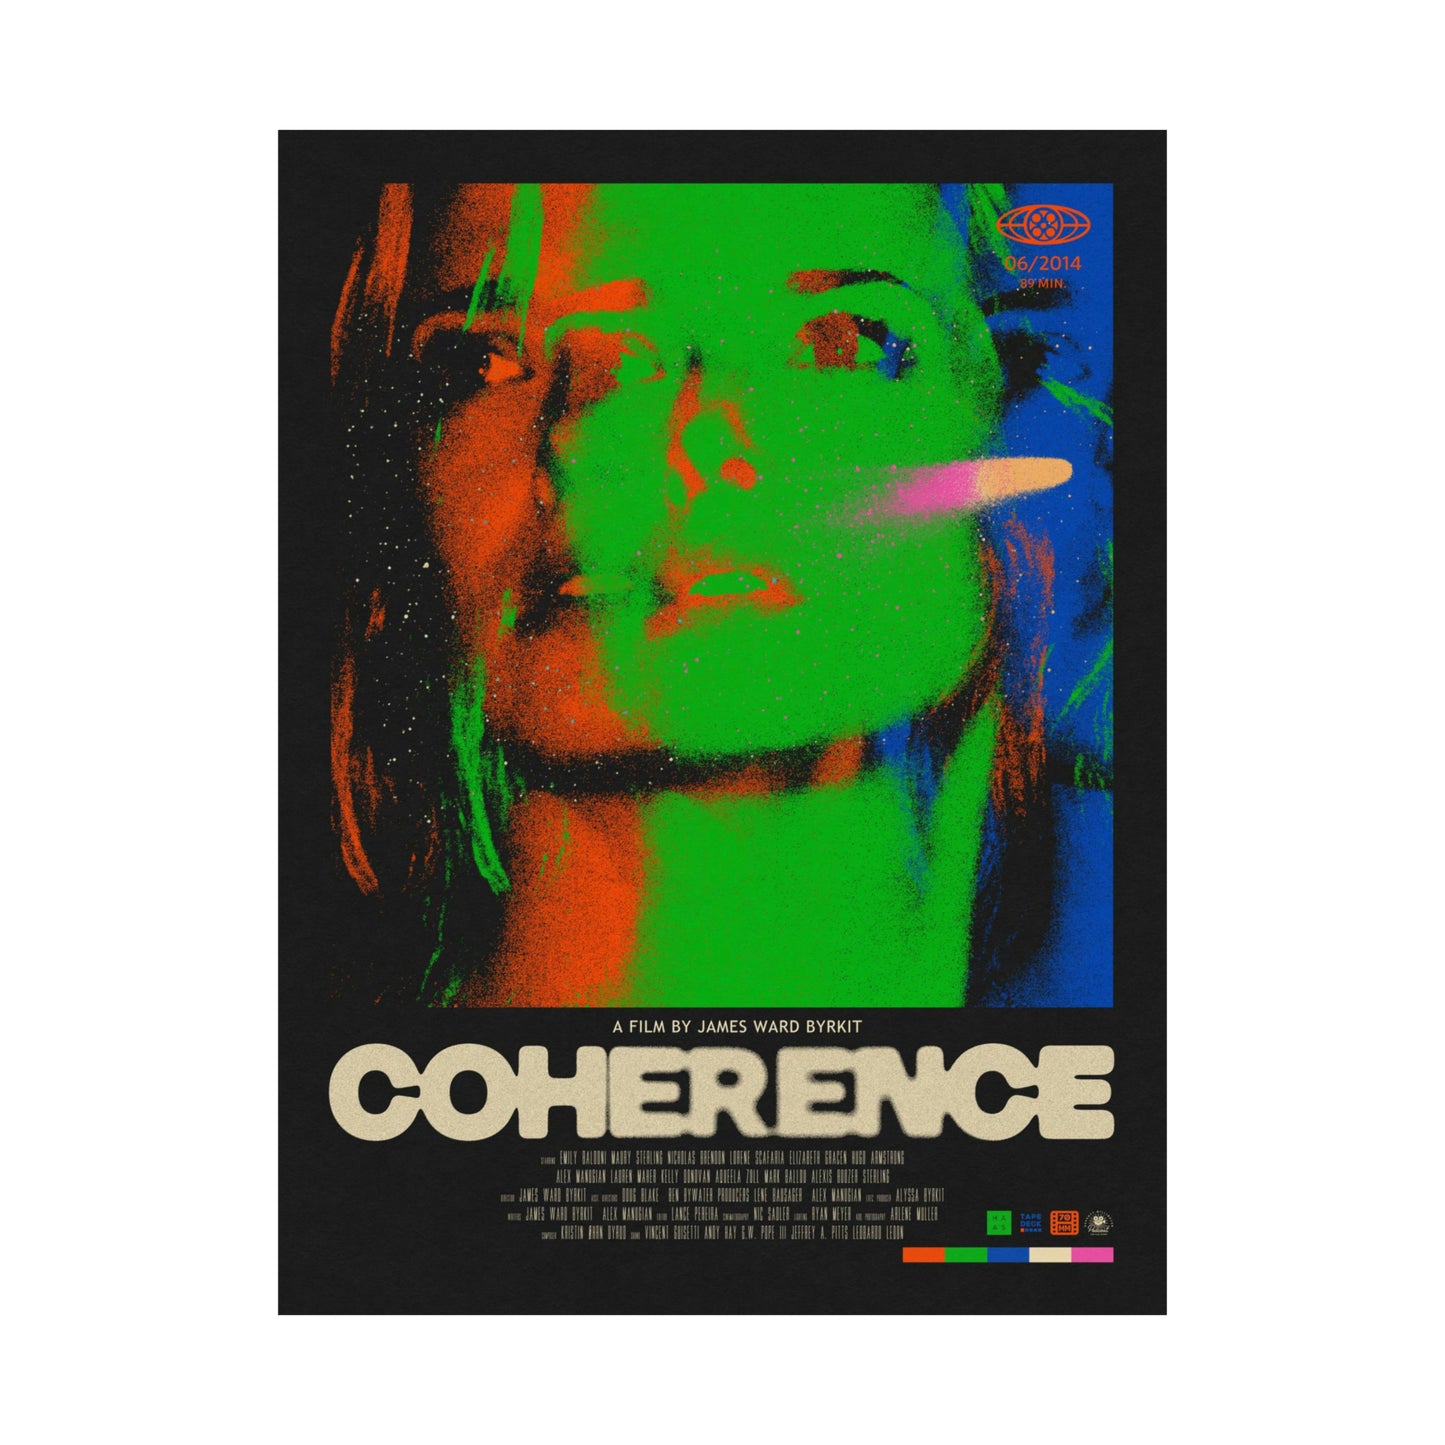 Episode 209: Coherence